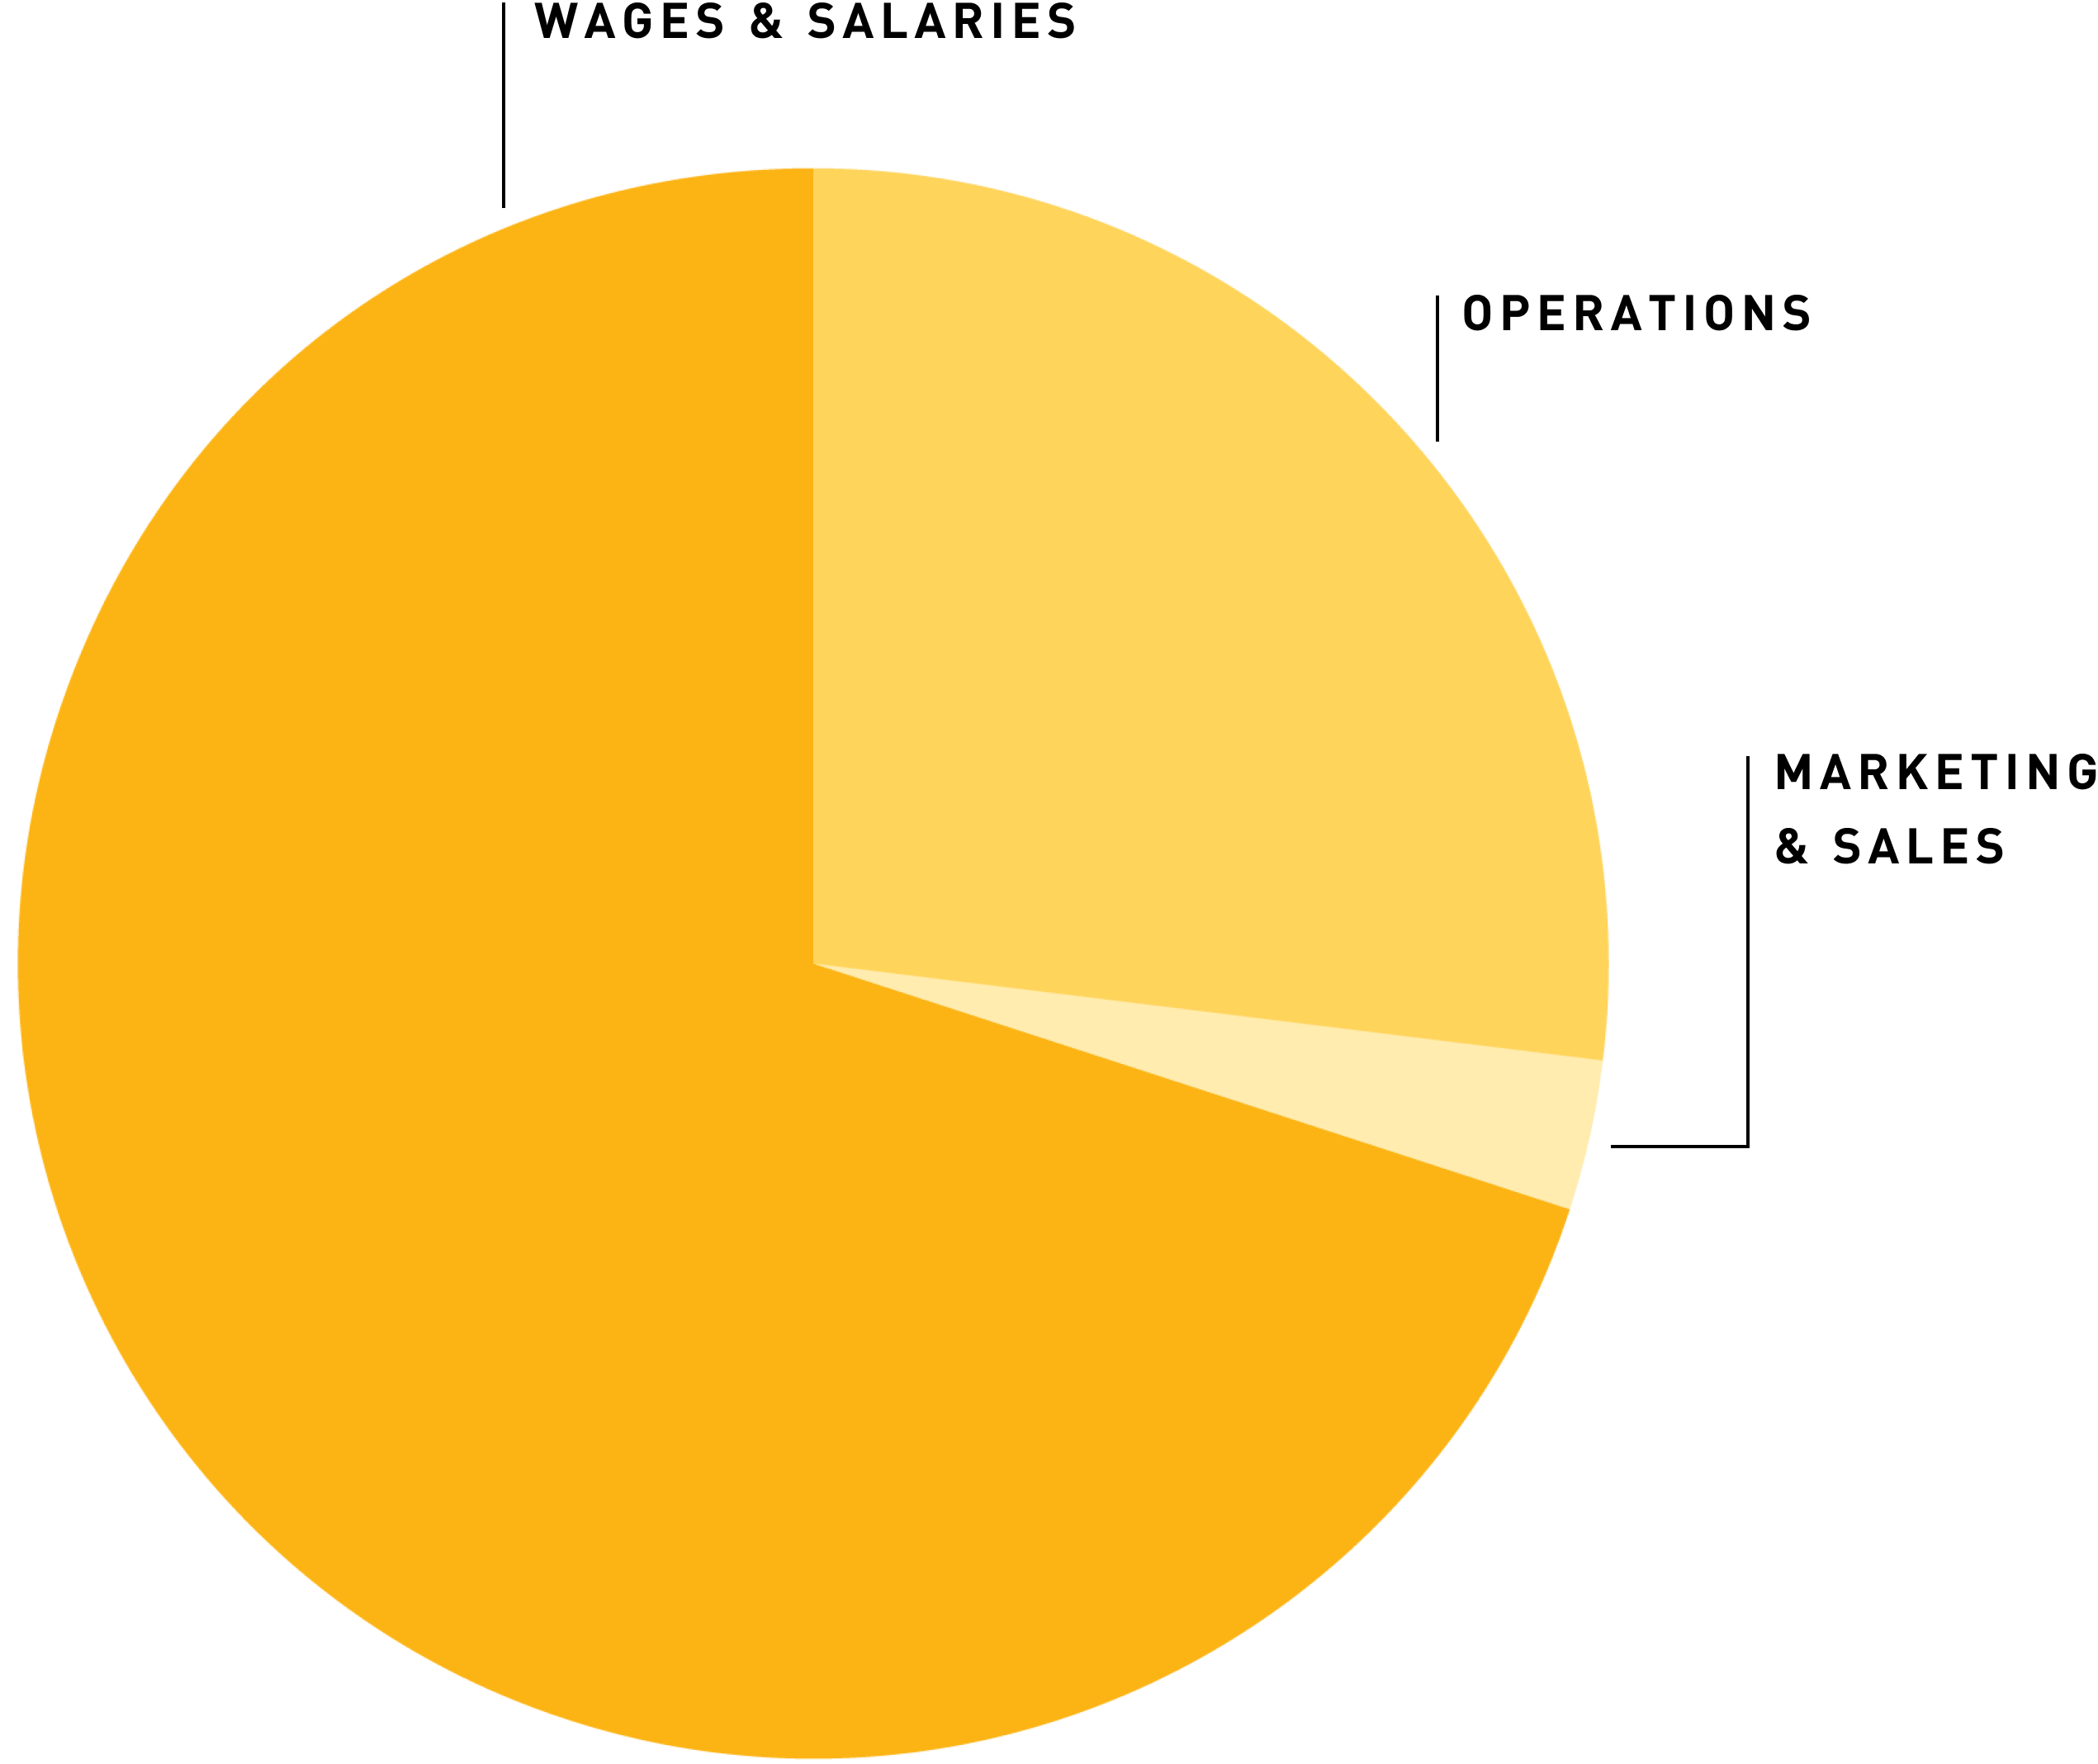 Pie chart showing breakdown of business costs as outlined